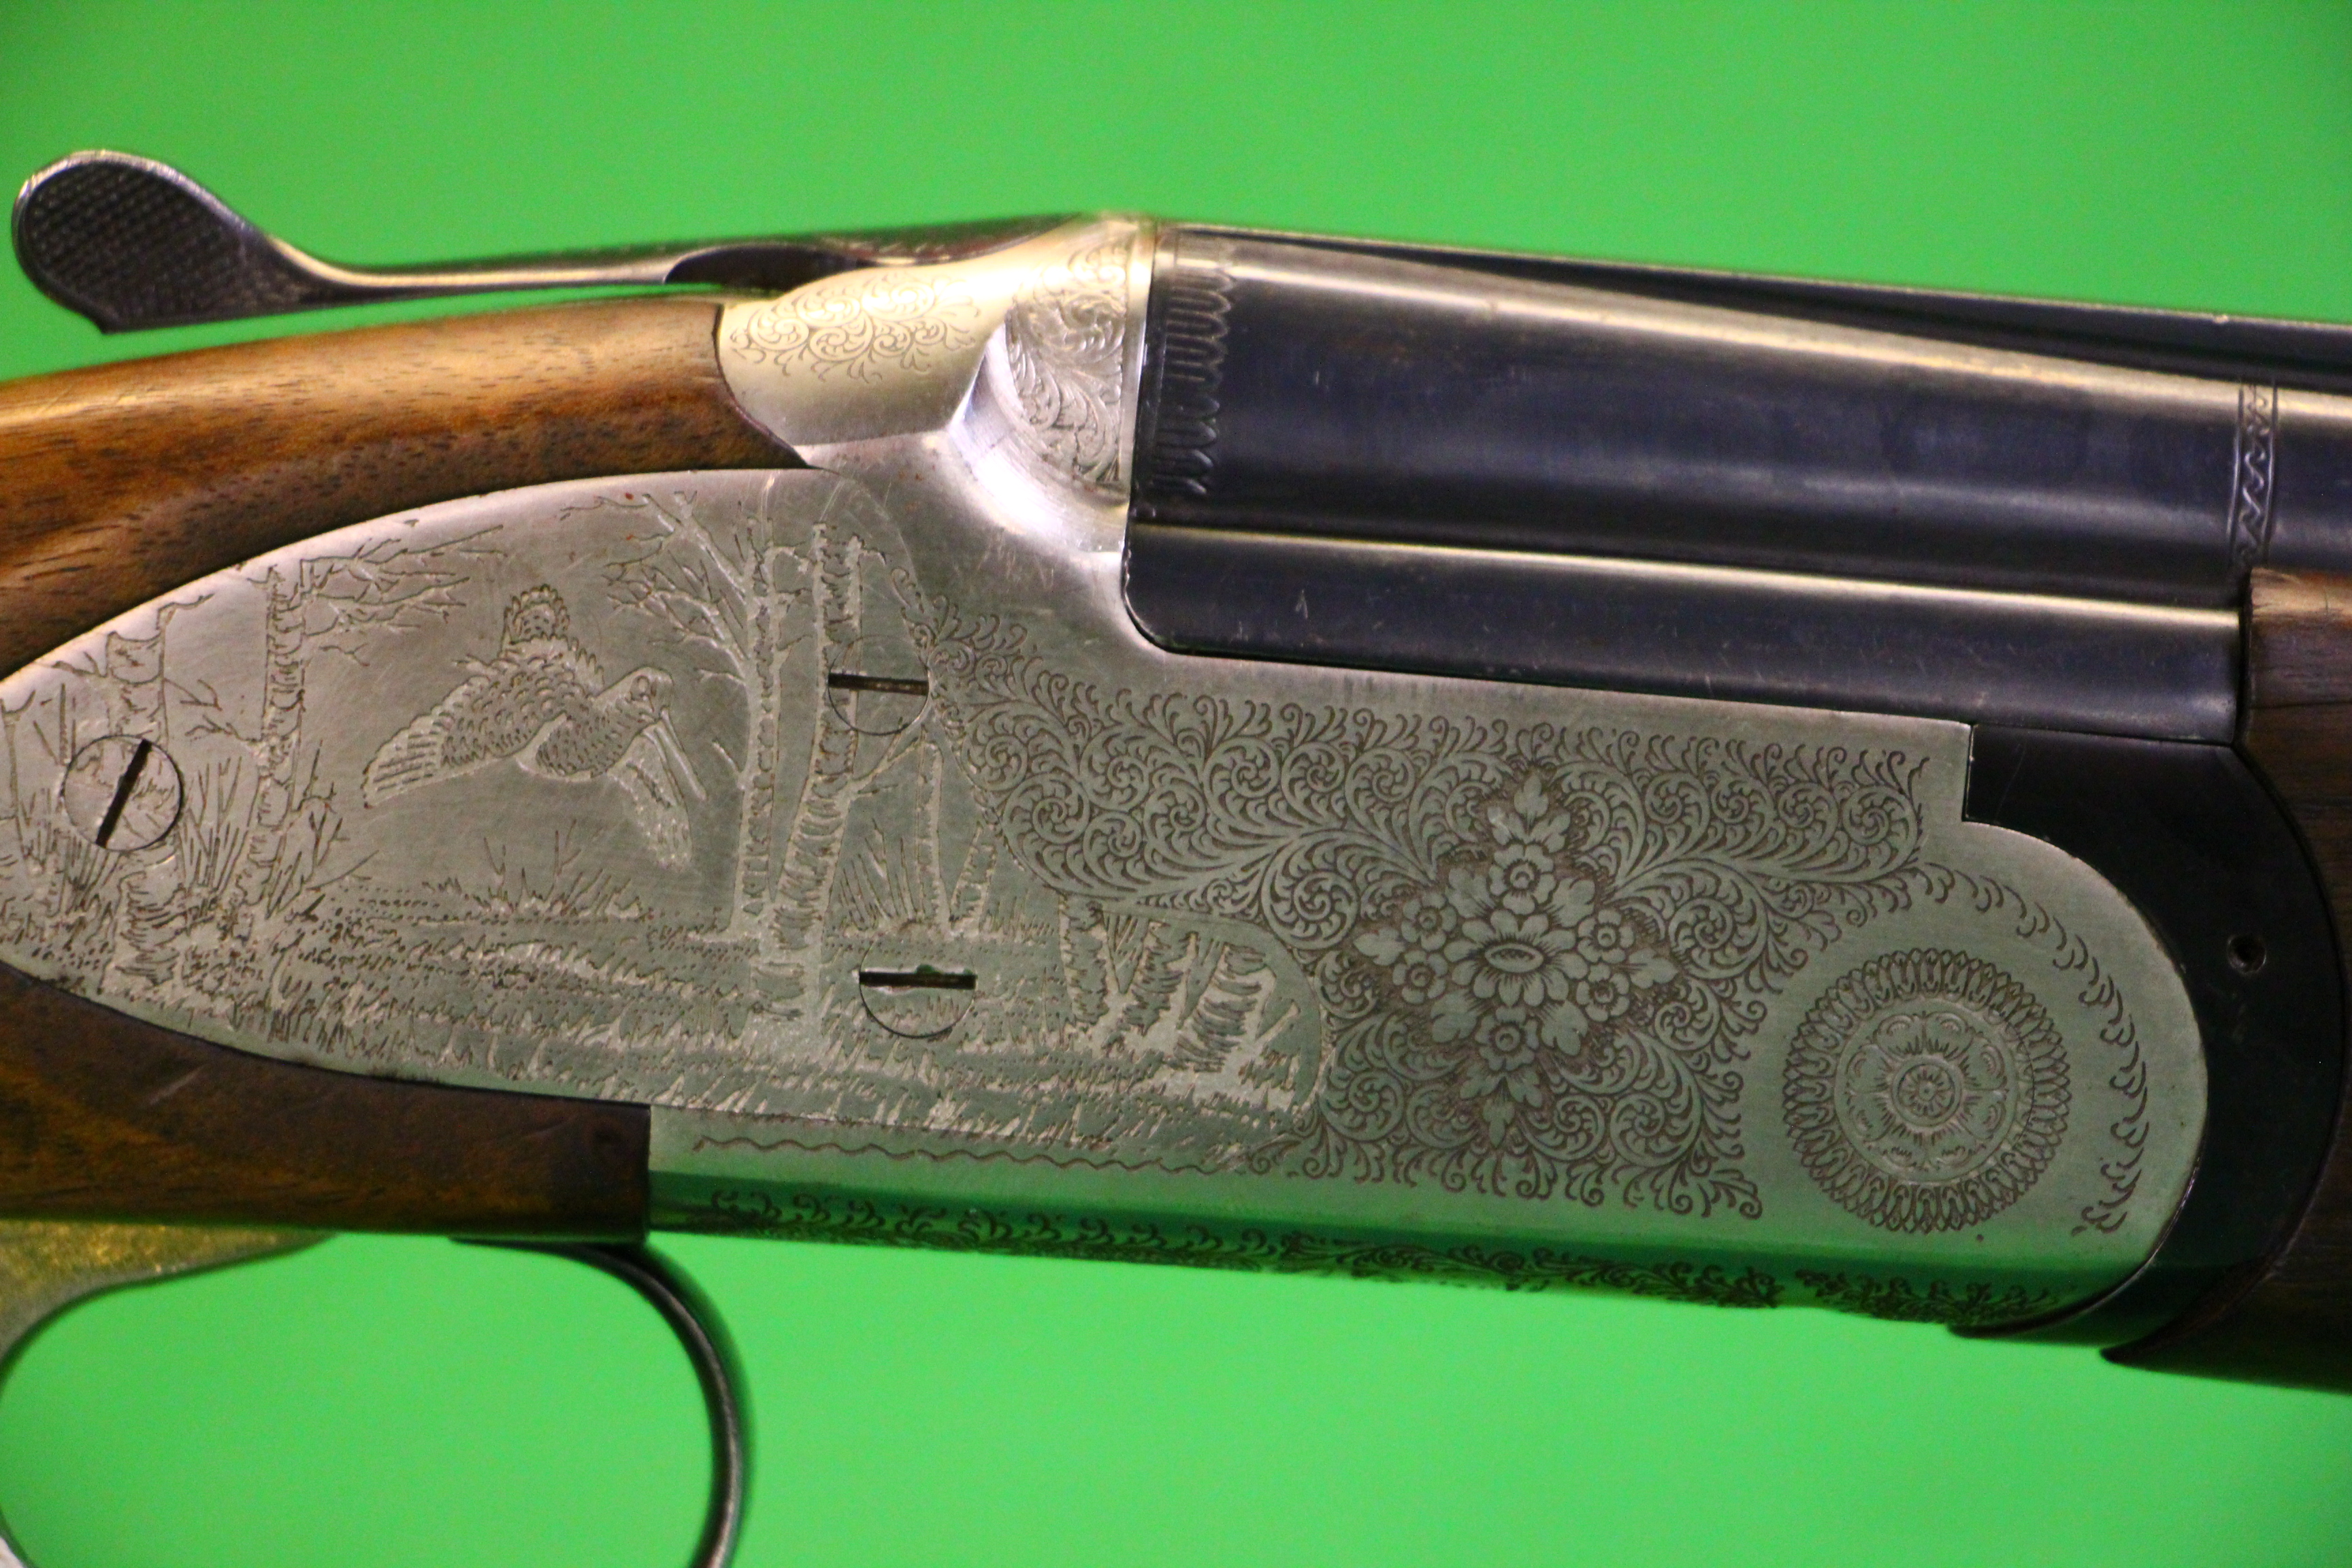 BETTINSOLI 12 BORE OVER AND UNDER SHOTGUN #98200 5 CHOKES AND KEY - (ALL GUNS TO BE INSPECTED AND - Image 4 of 13